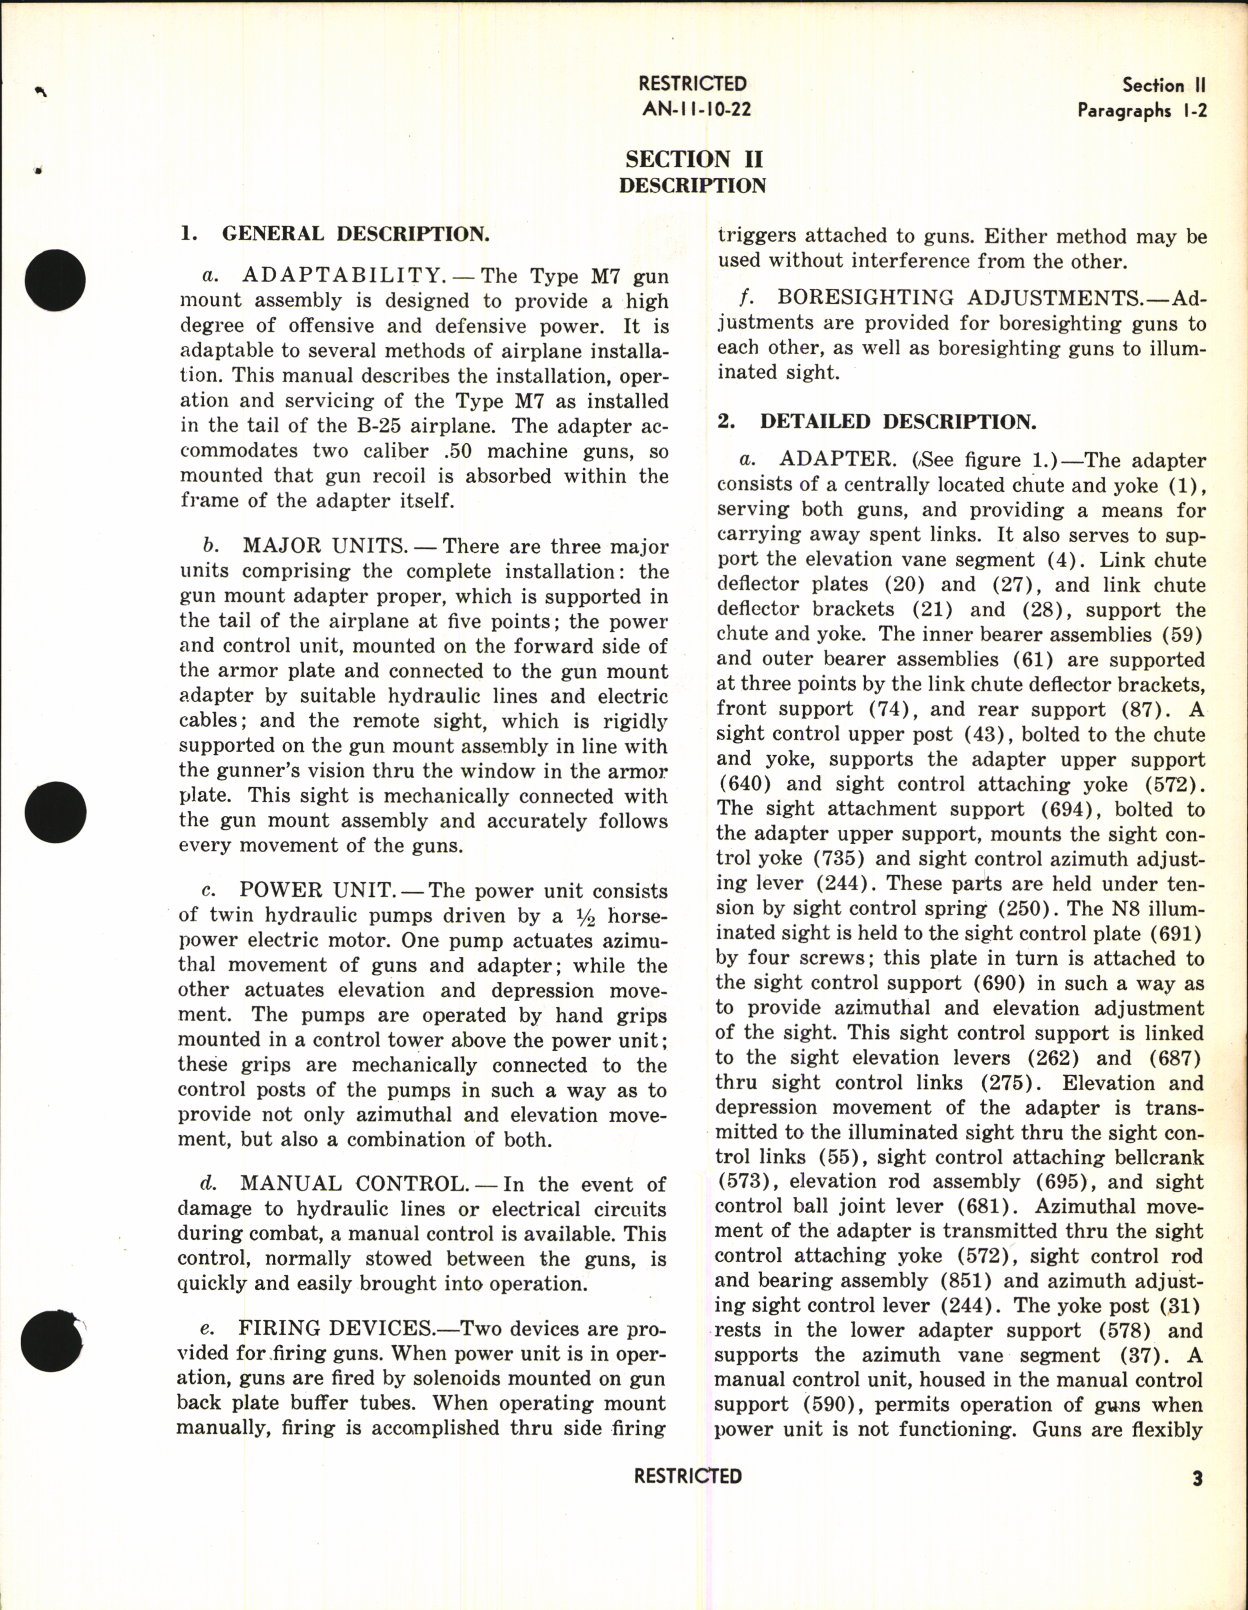 Sample page 7 from AirCorps Library document: Handbook of Instructions with Parts Catalog for Bell Twin Gun Mount Assembly Type M-7